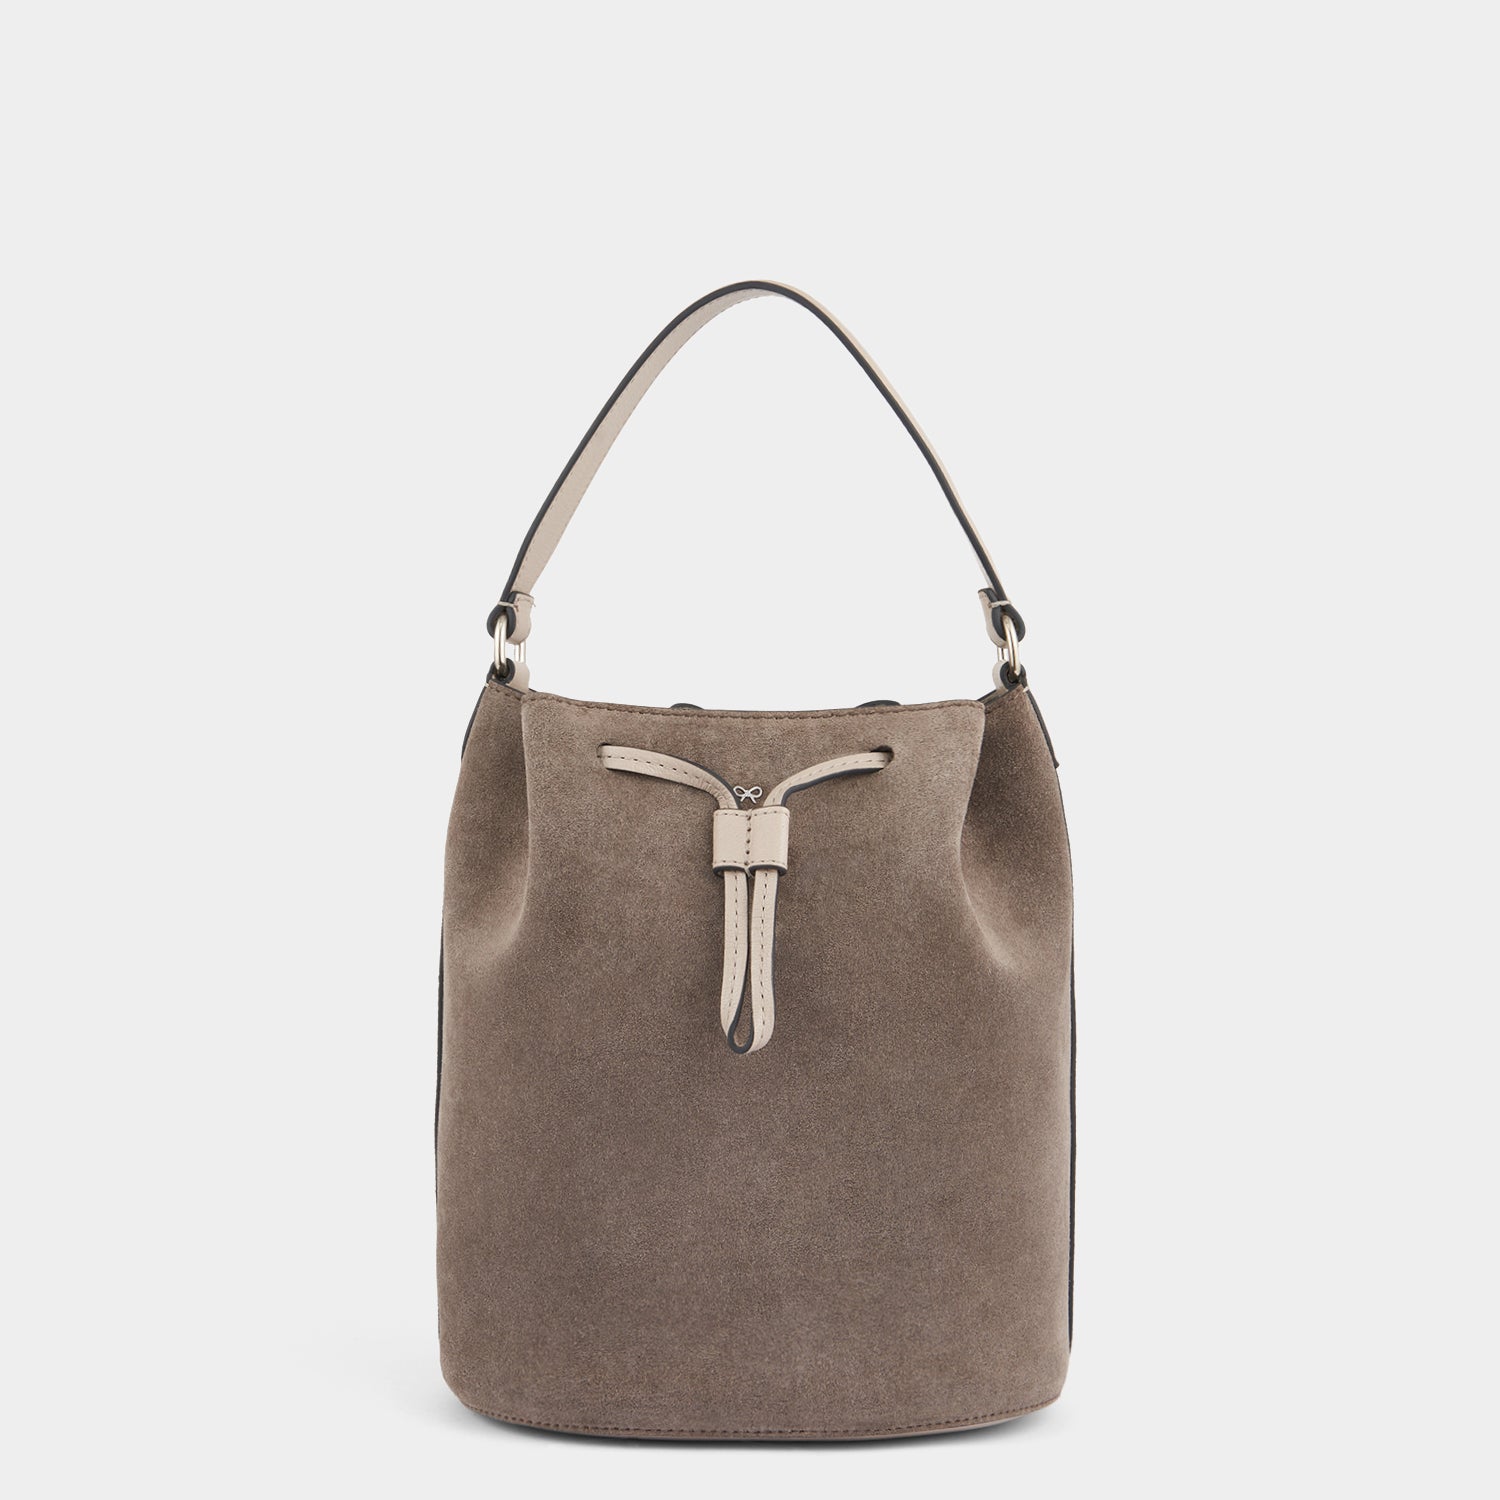 Drawstring Hobo Tote Brown Suede Tote Bag by Maison Margiela